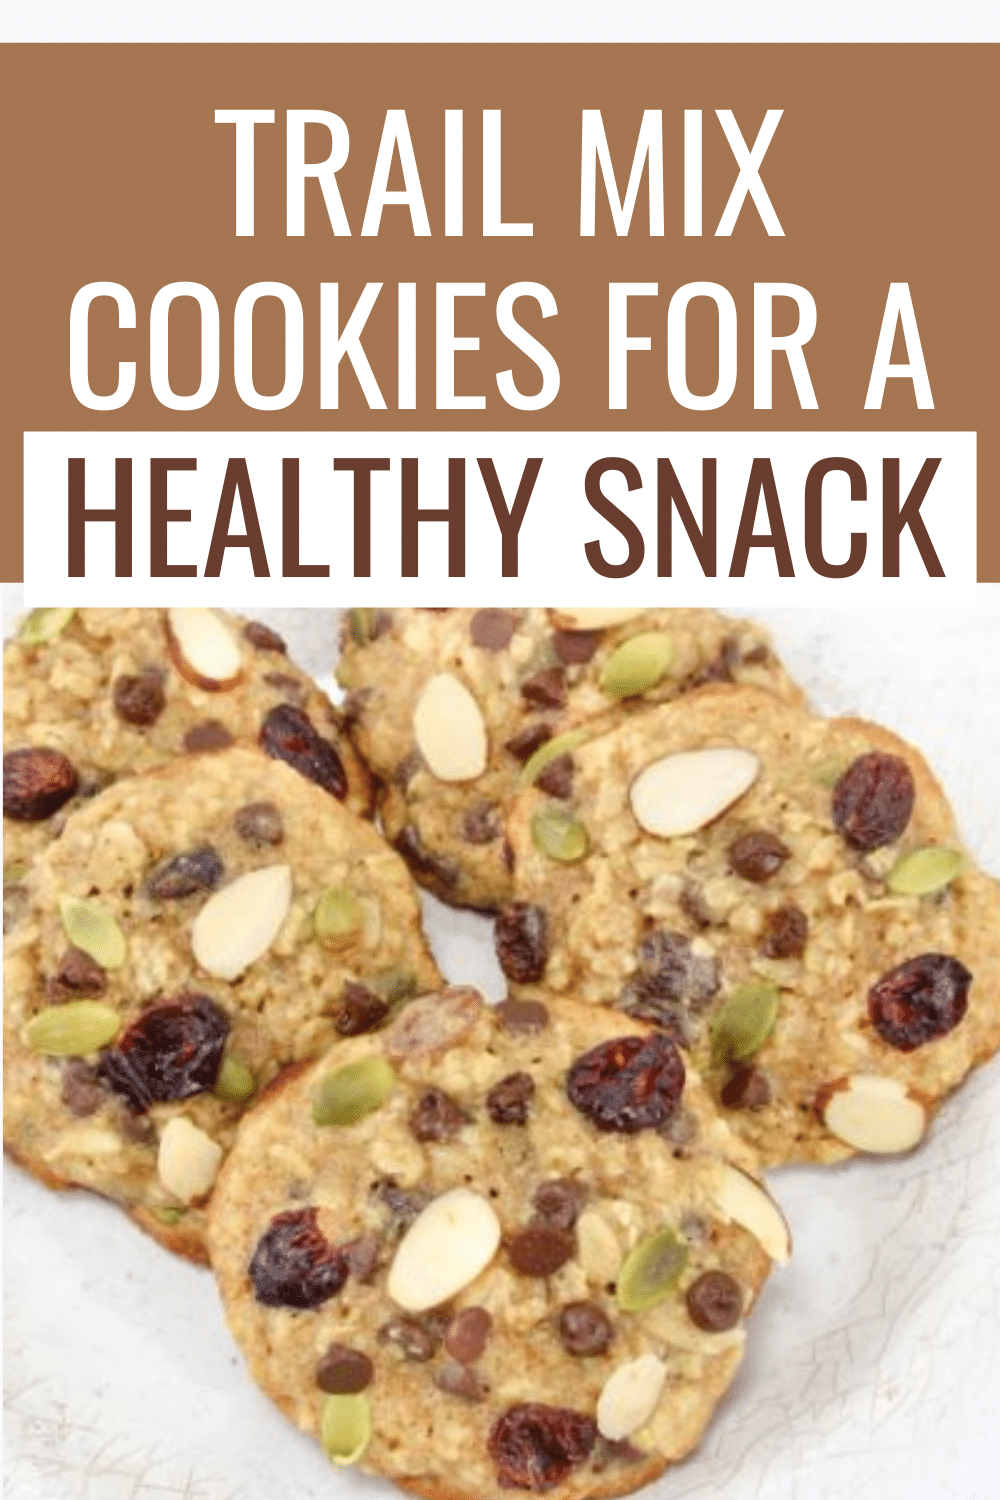 Are you looking for an easy healthy snack the kids will actually eat? Well, you will love this recipe for trail mix cookies! They’re the perfect simple oatmeal cookie - chewy, healthy, and a dessert food you can feel good about. #healthysnack #easyrecipe #kidapproved #trailmixrecipe #oatmealcookies via @wondermomwannab